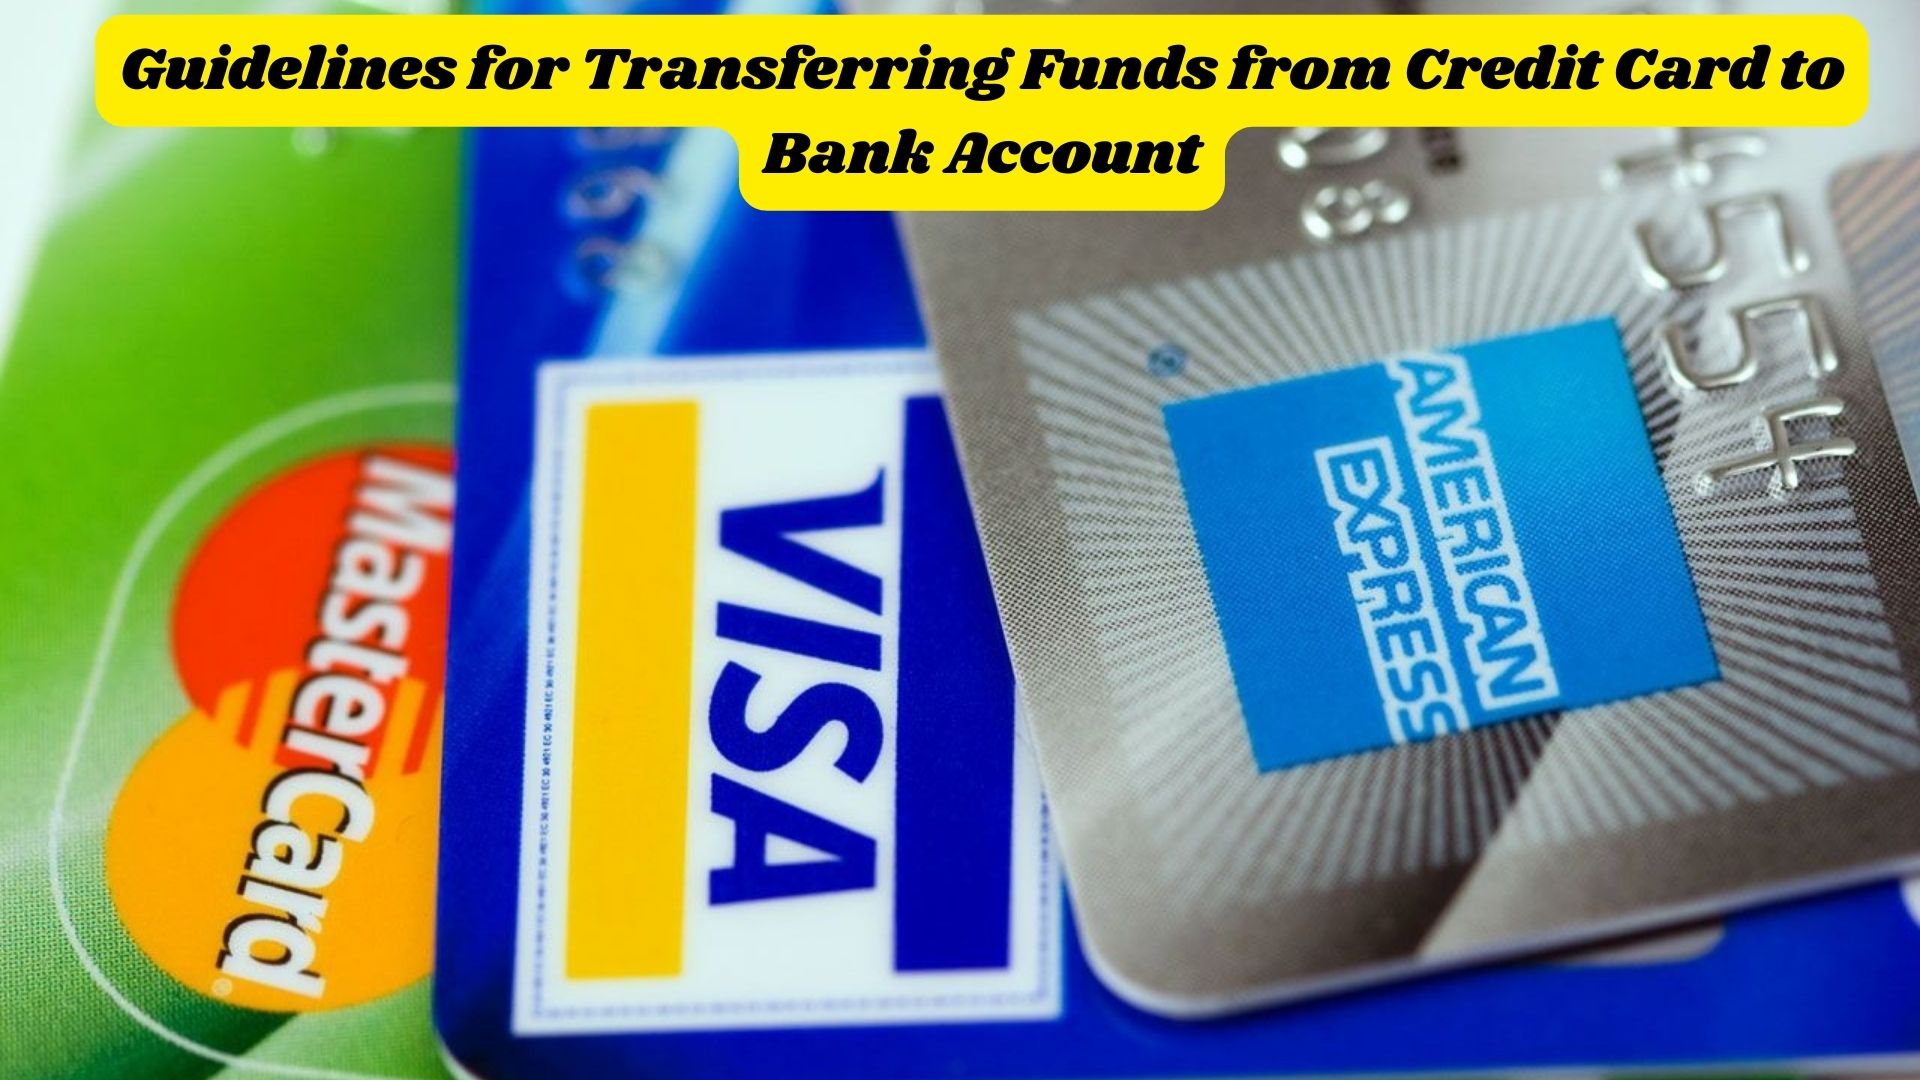 Guidelines for Transferring Funds from Credit Card to Bank Account